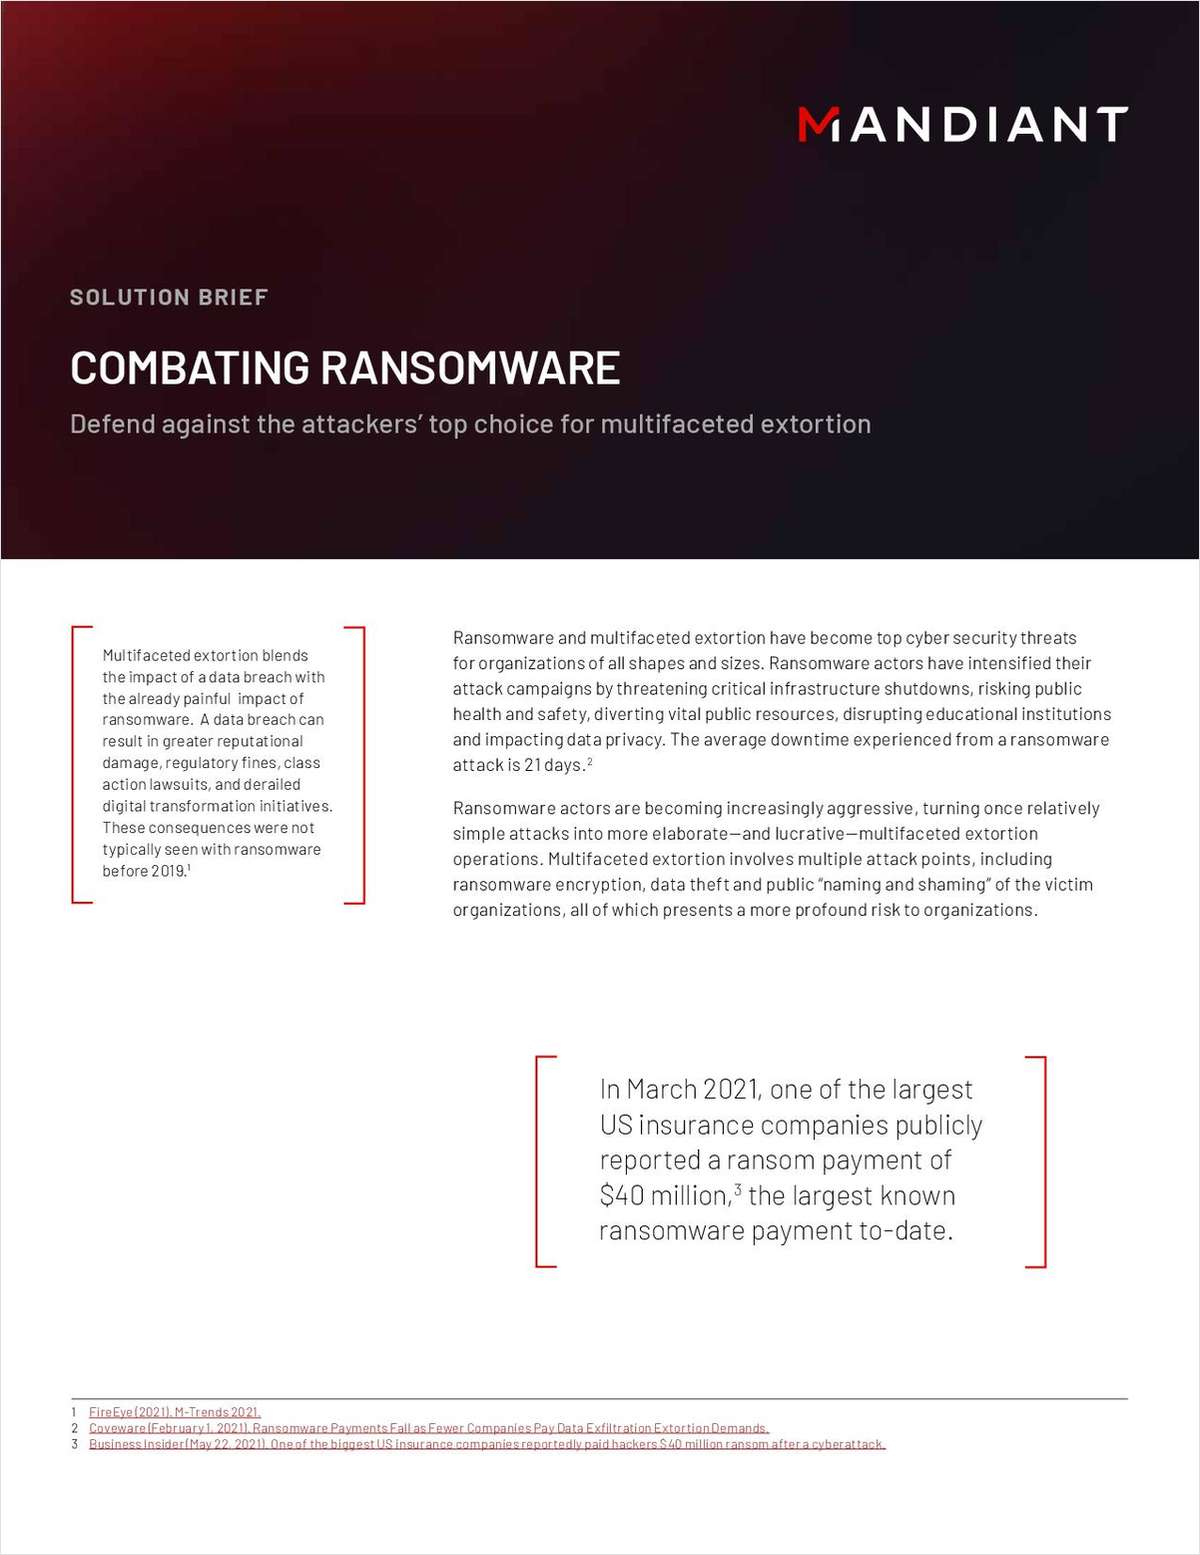 Solution Brief: Combatting Ransomware